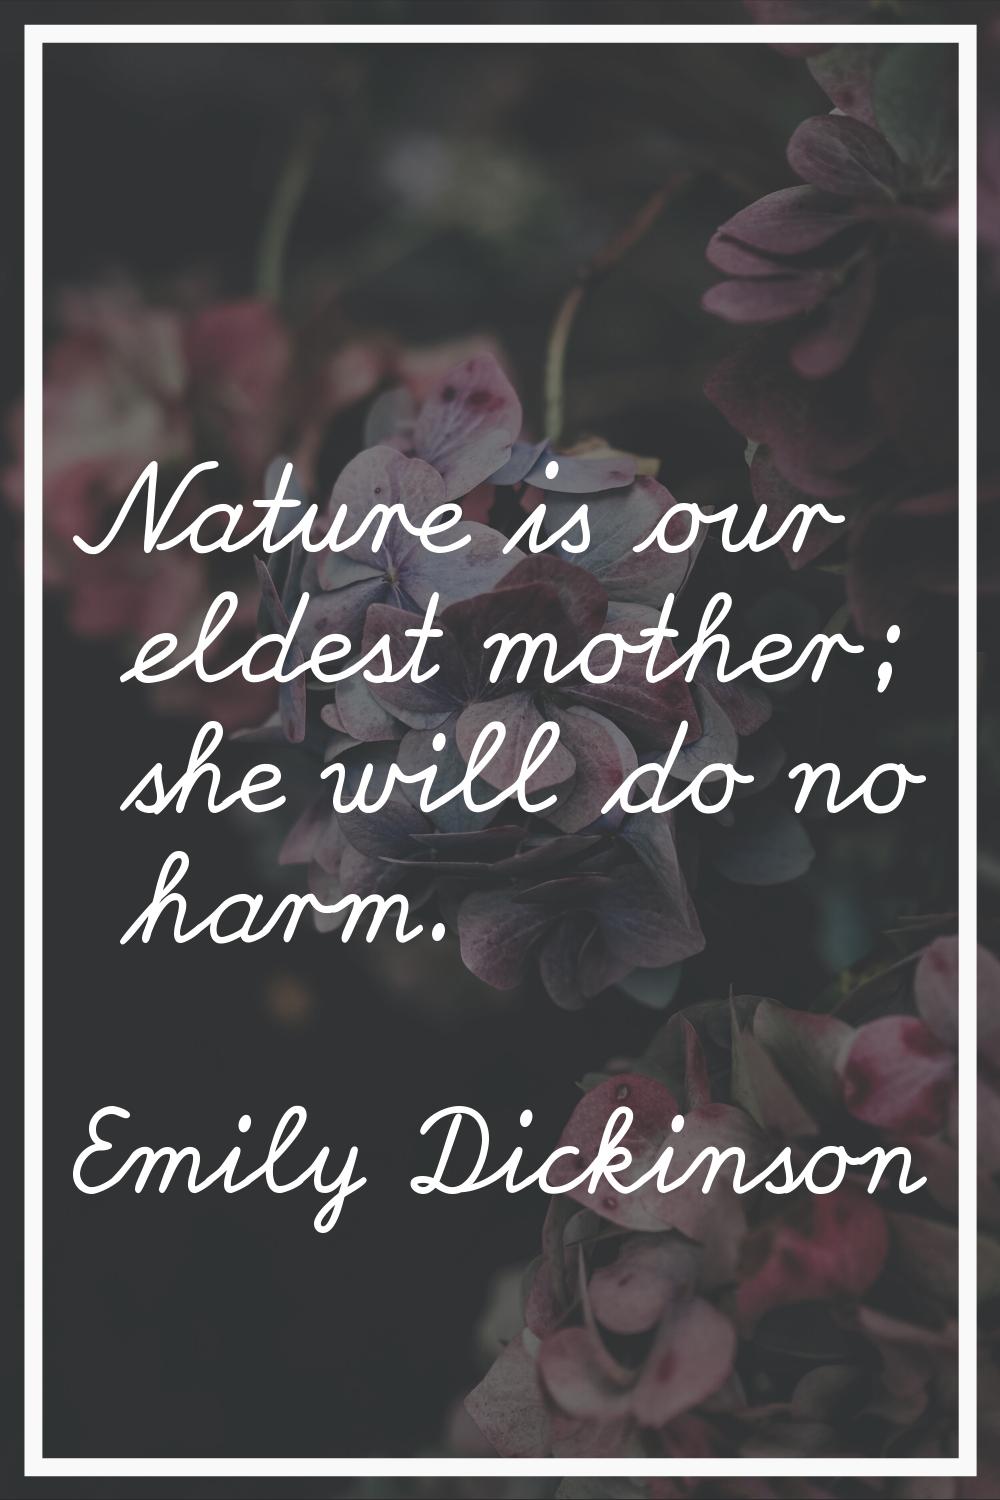 Nature is our eldest mother; she will do no harm.